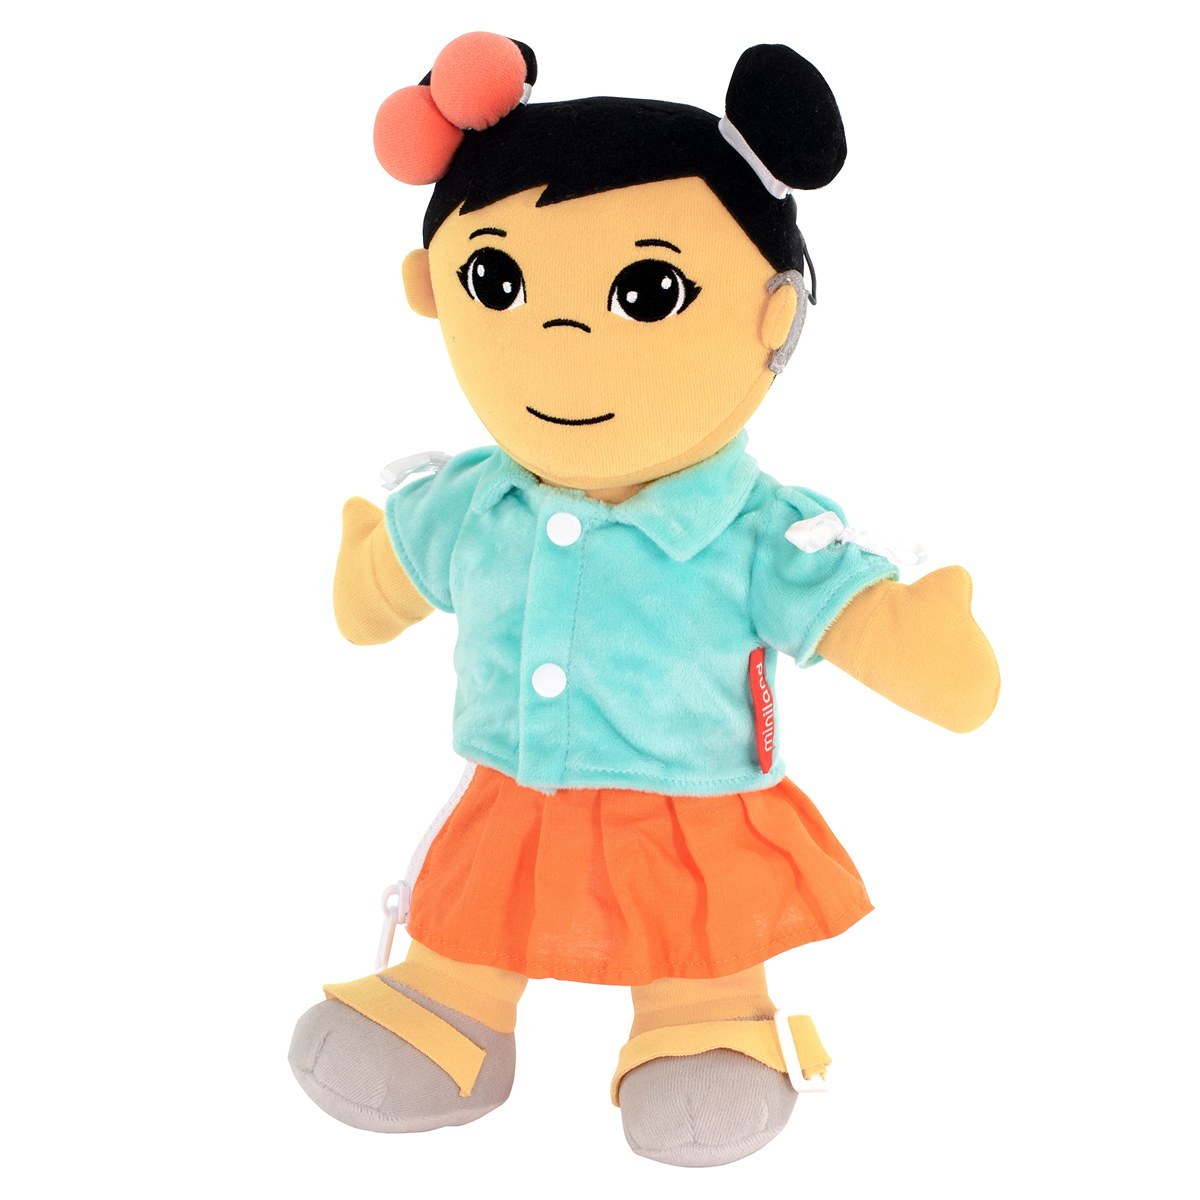 Miniland Fastening Learn To Dress Doll - Female with Cochlear Implant